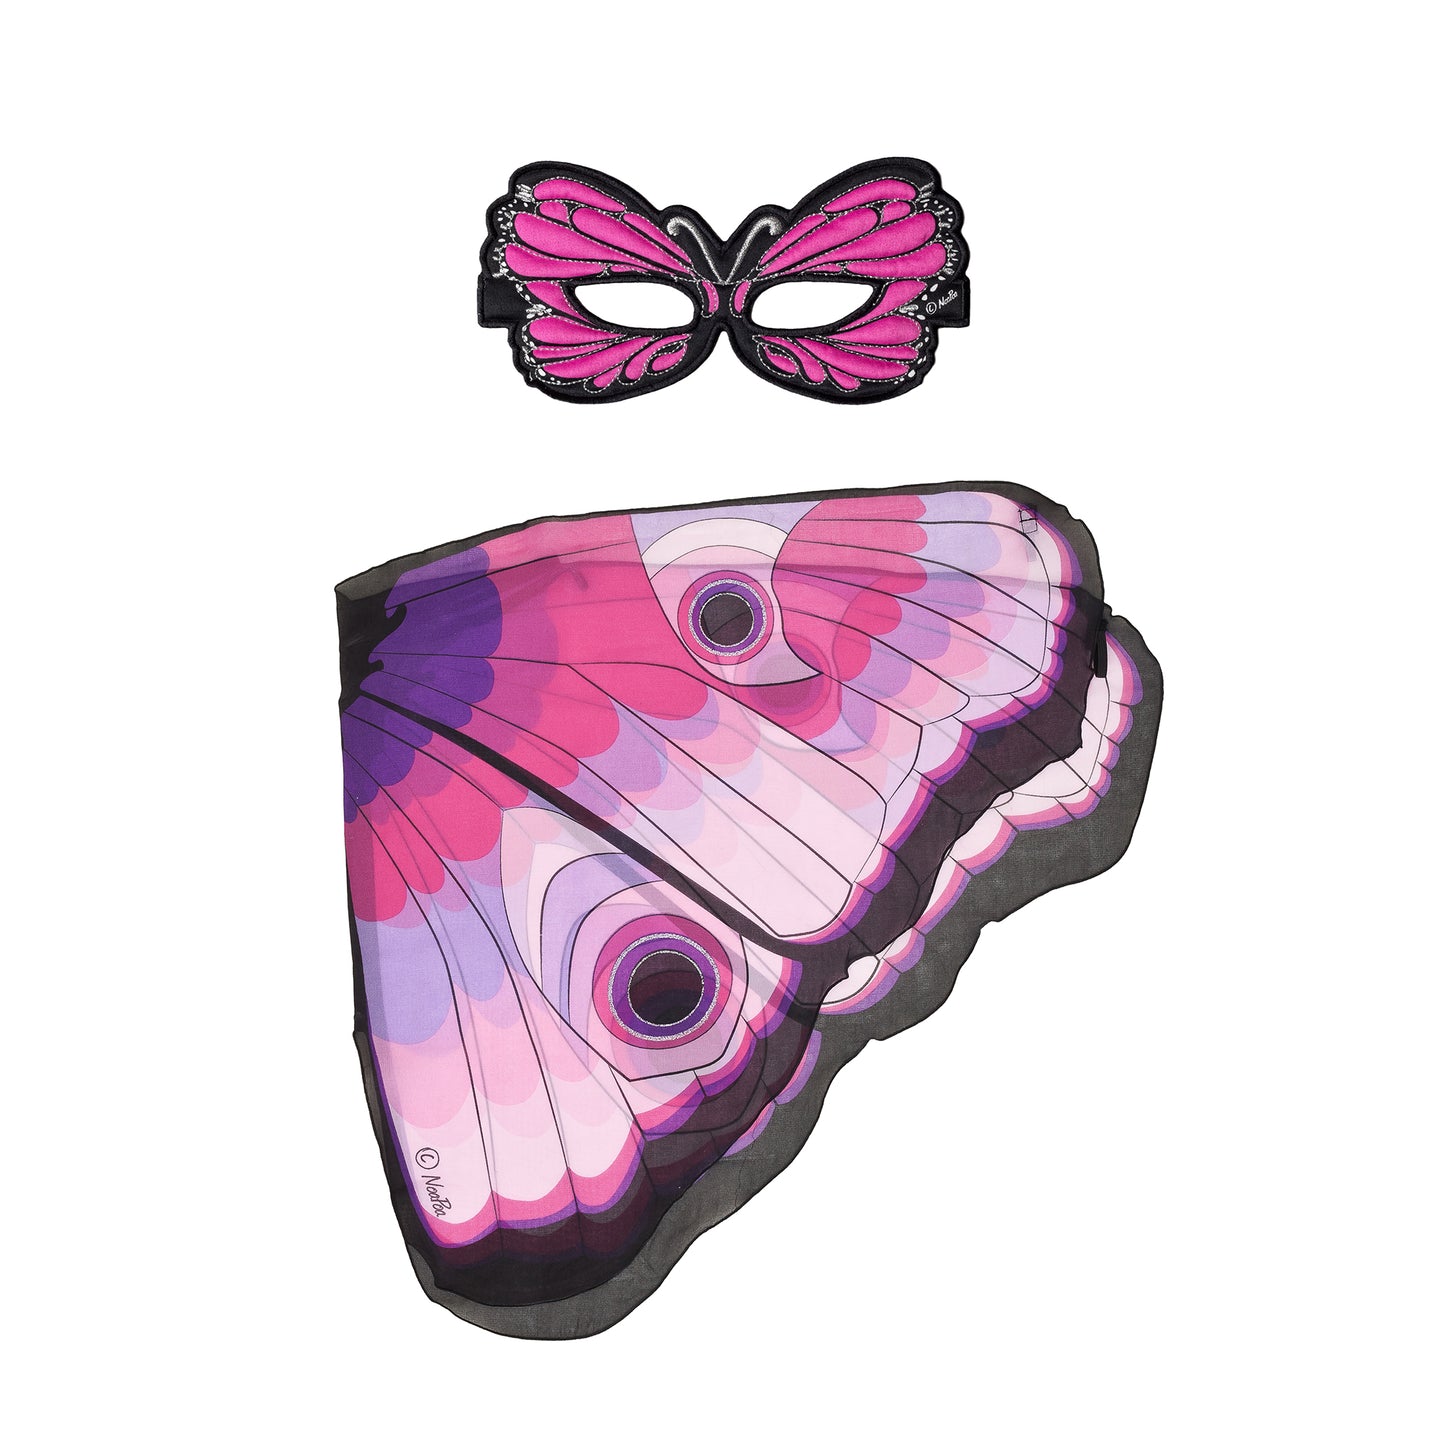 BUTTERFLY W/EYES WINGS + MASK in eco-friendly cotton gift bag